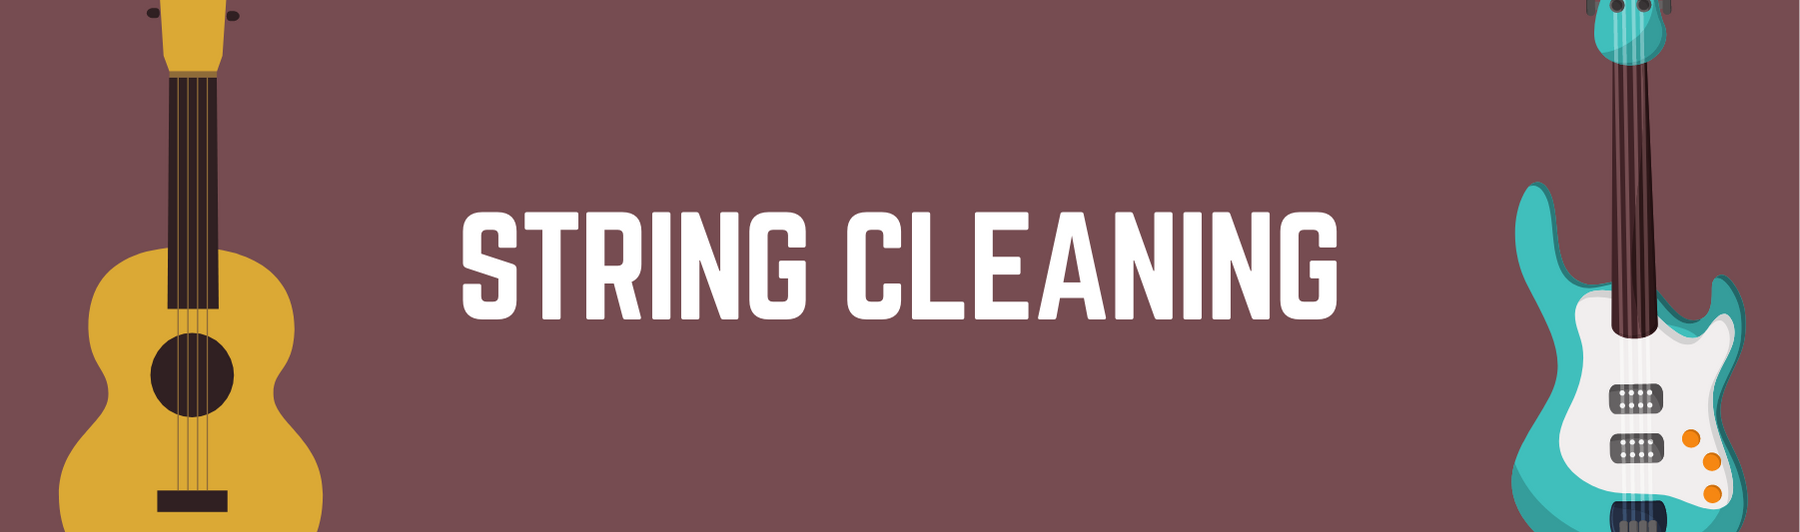 String Cleaning: Maintaining Your Guitars, Fountaindale Public Library